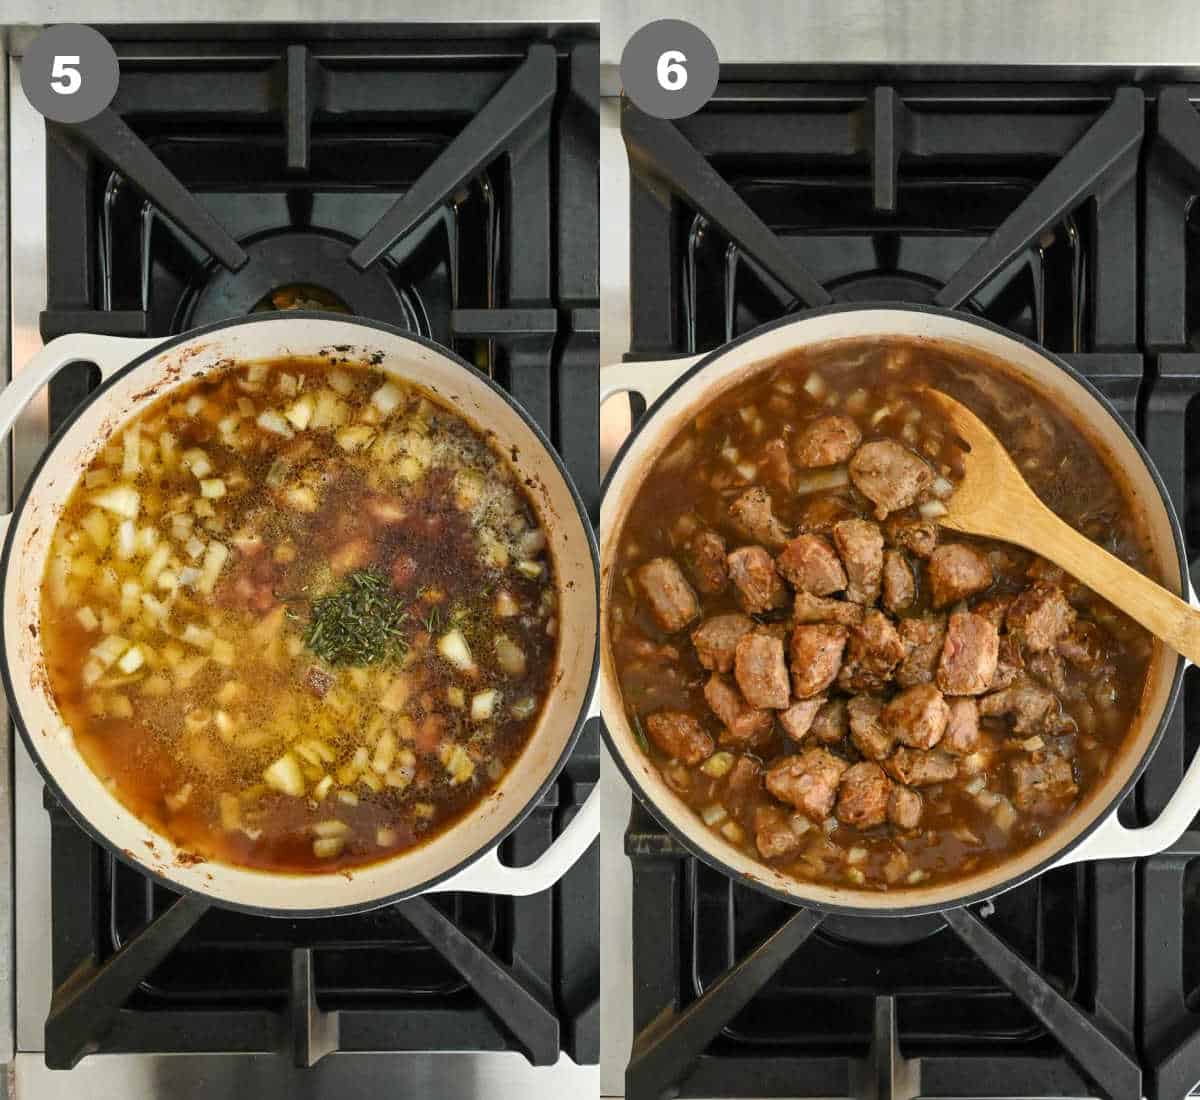 Steps 5 and 6 for making beef tips and gravy.